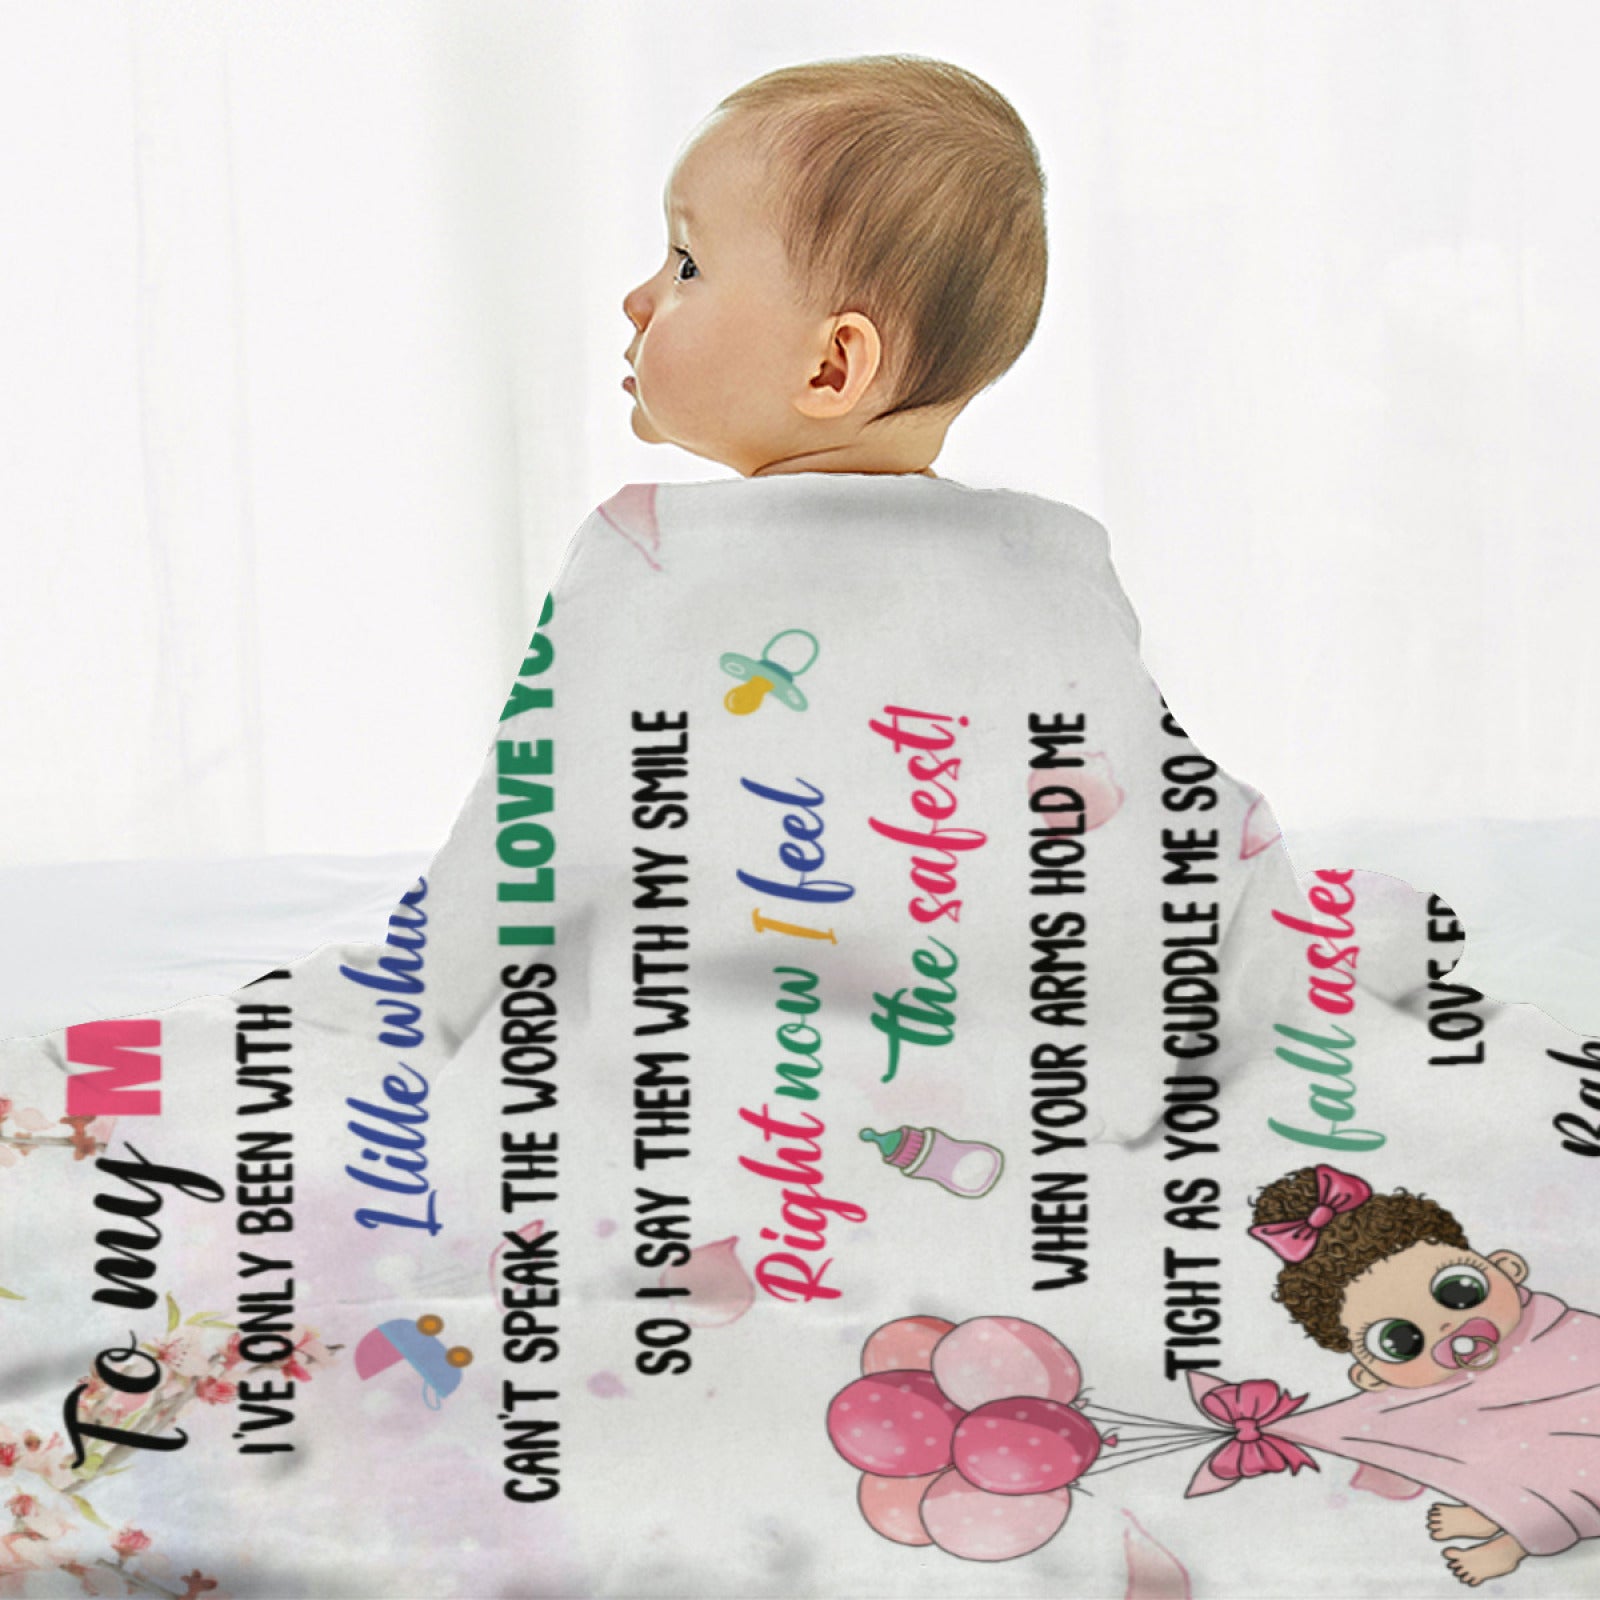 Custom Blanket for Baby Girls with Name, Soft Personalized Baby Blankets Gifts for Baby Newborn, Birthday Chrismas - colorfulcustom